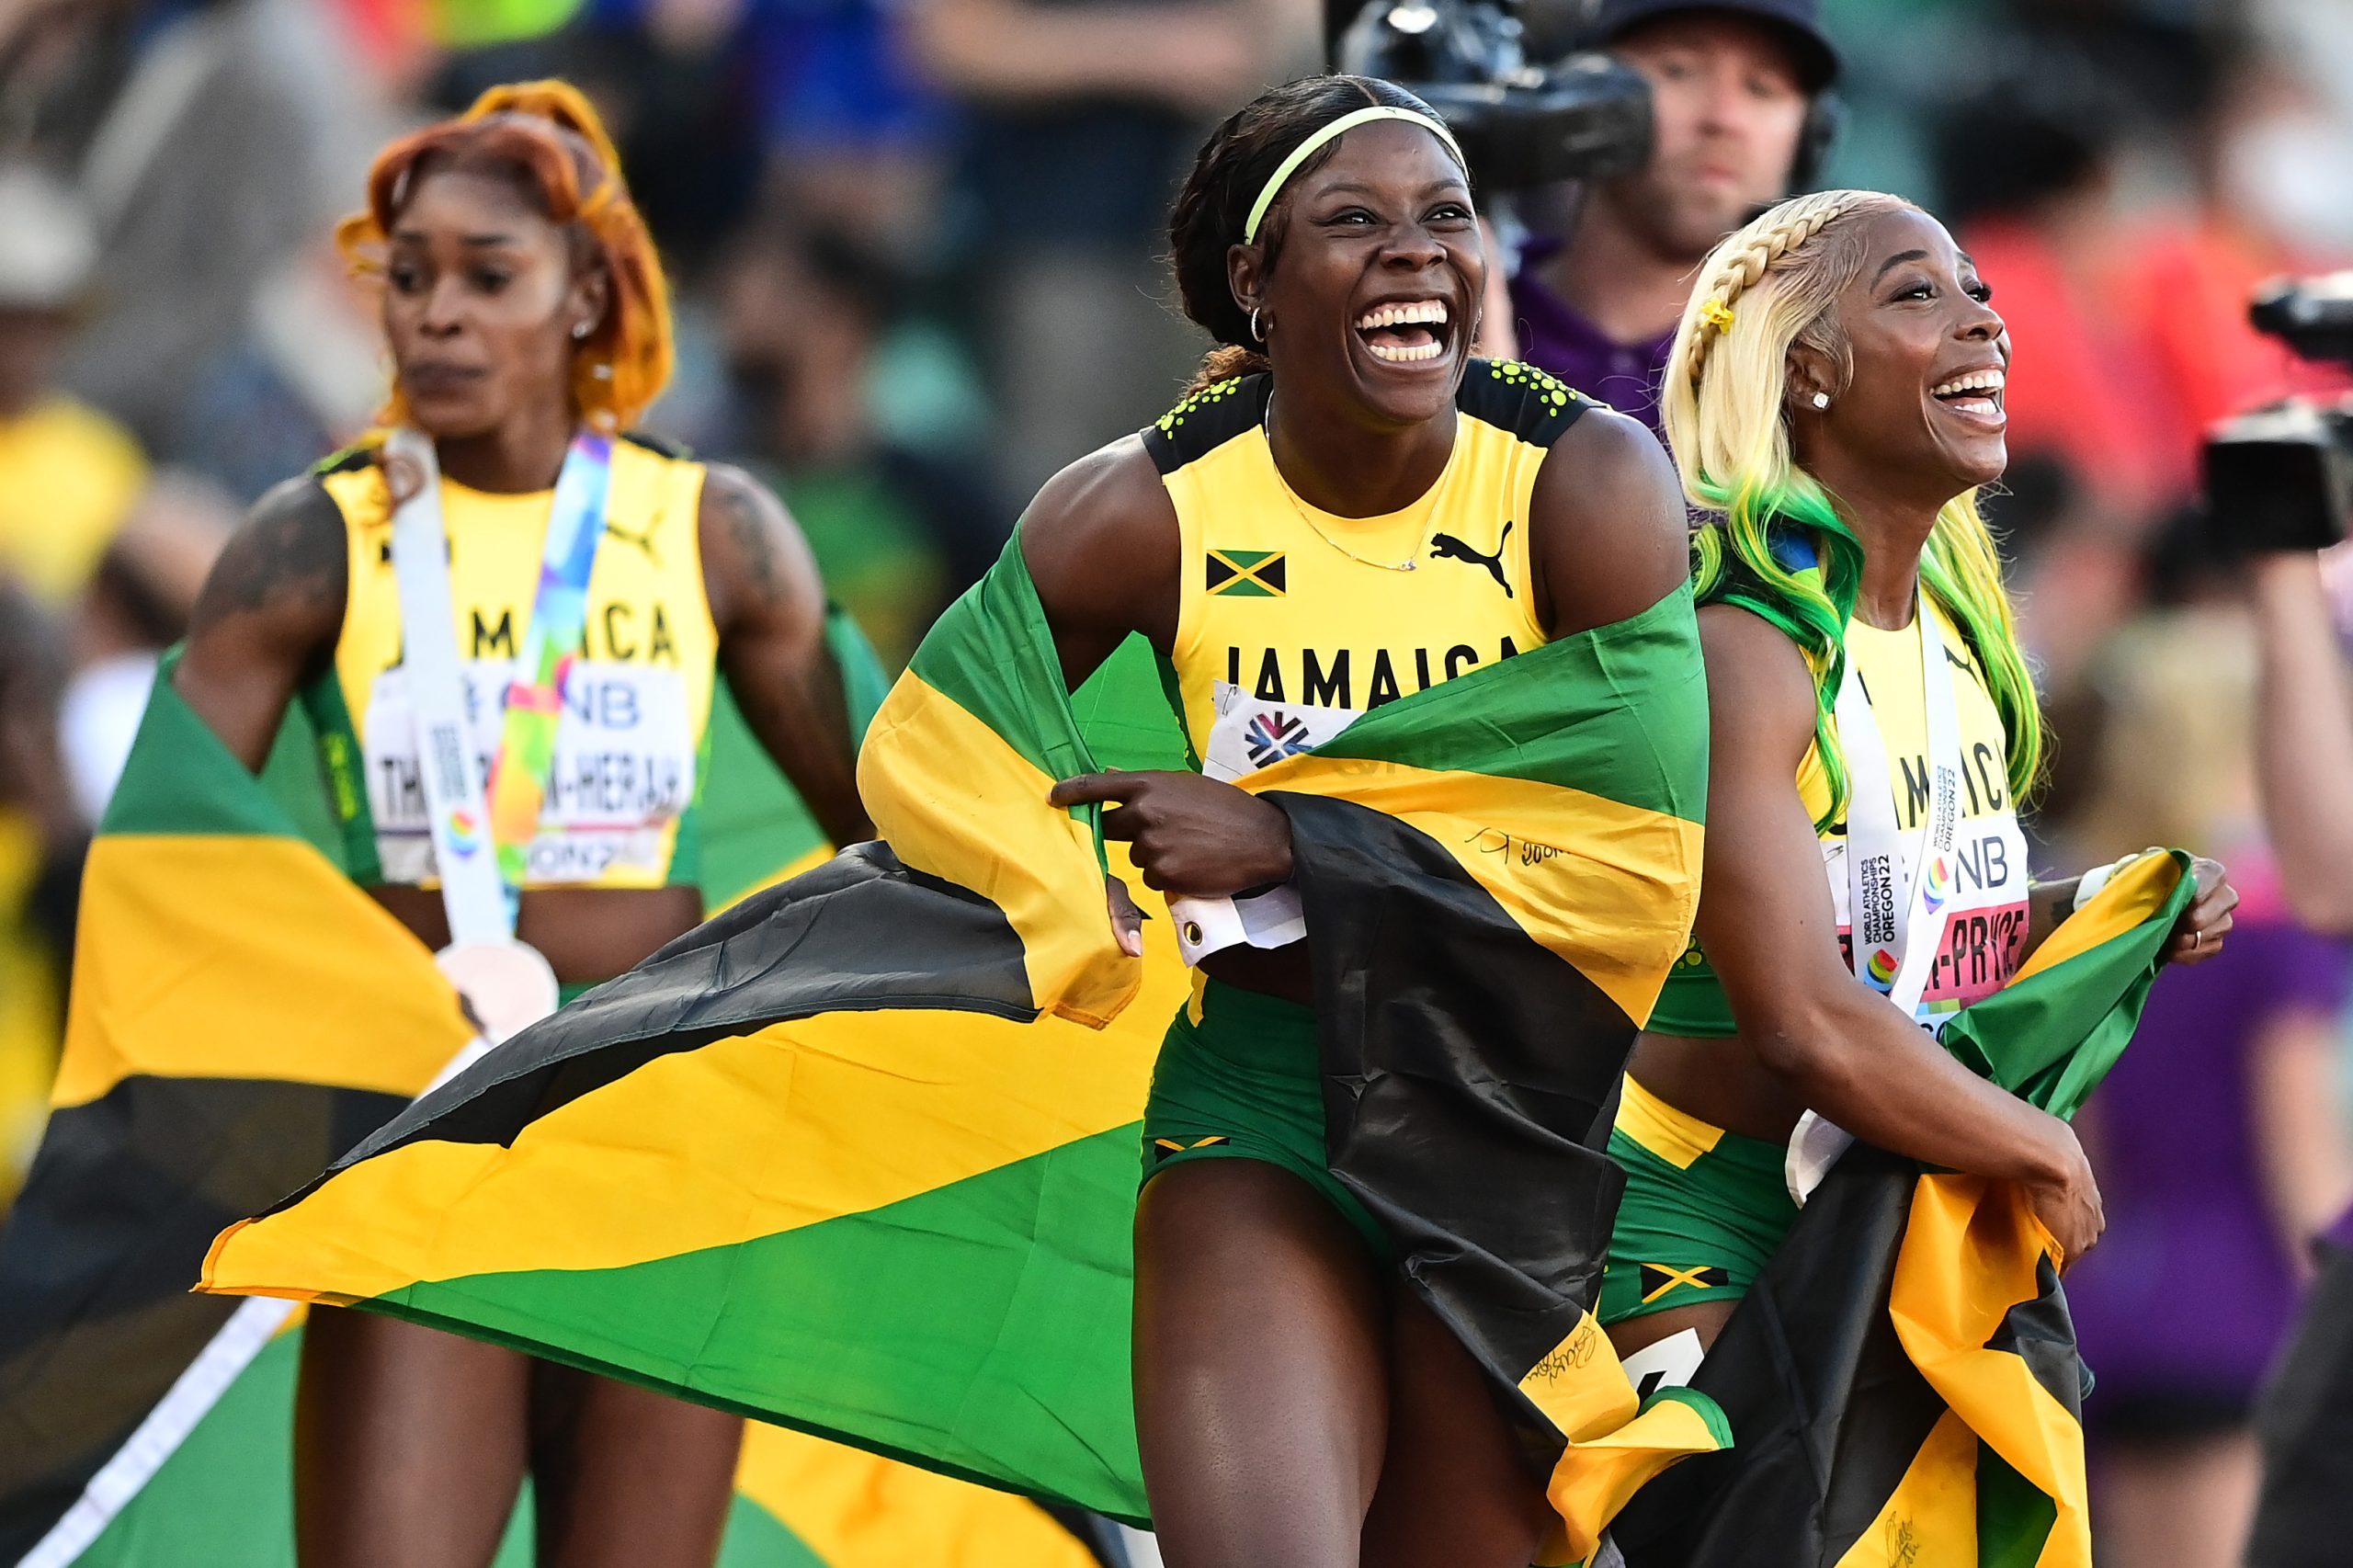 Shericka Jackson and Shelly-Ann Fraser-Pryce to Lead Jamaica's Team for Budapest 2023 World Championships